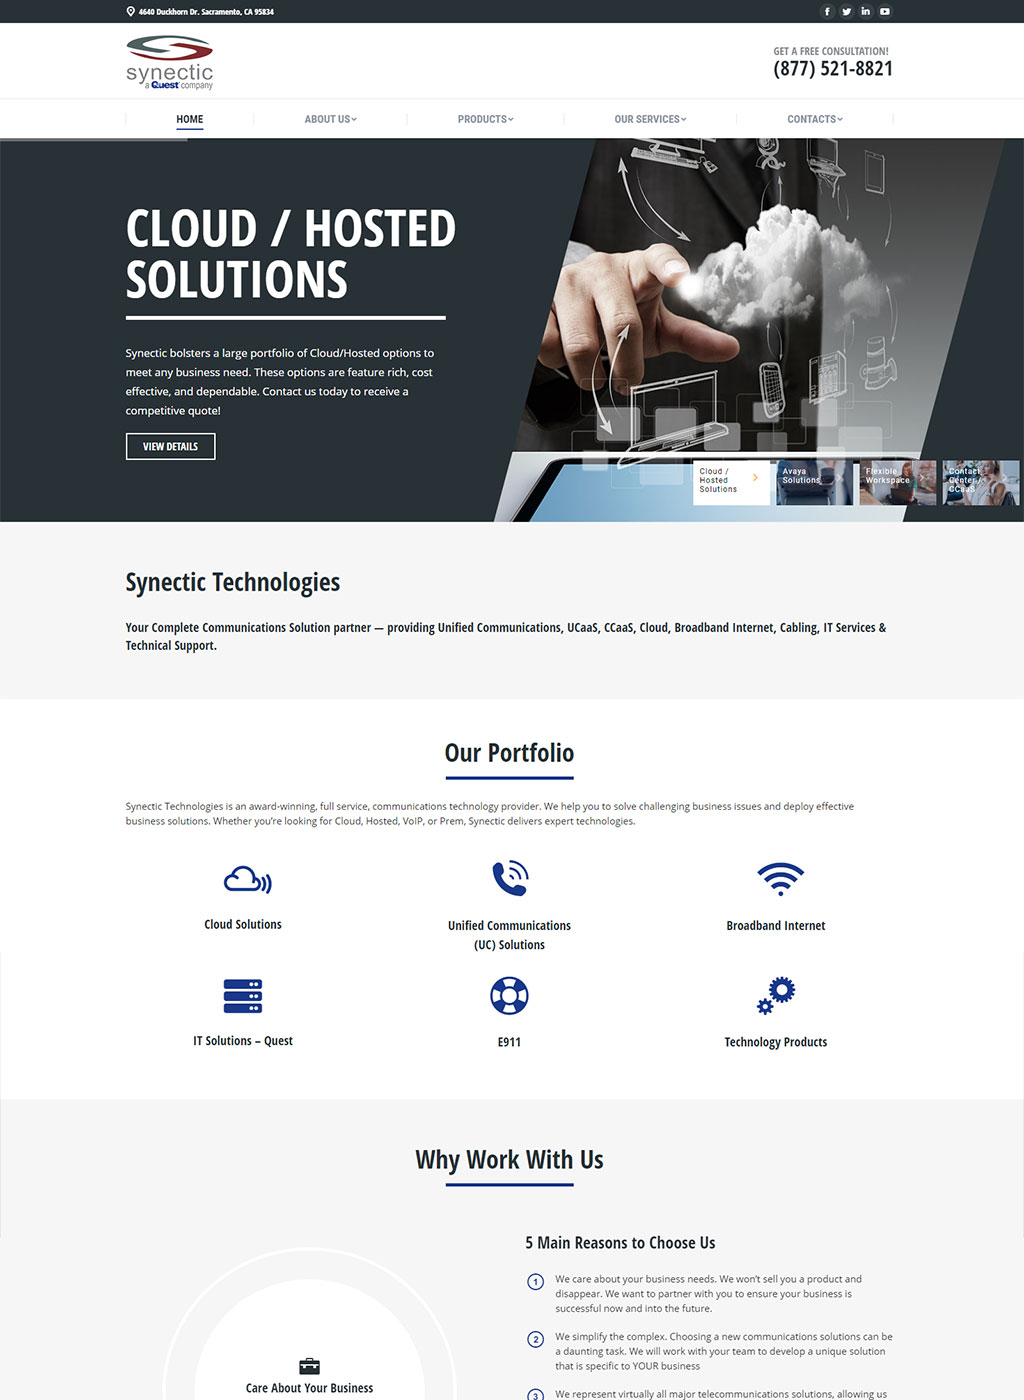 Website developed for Synectic Technologies